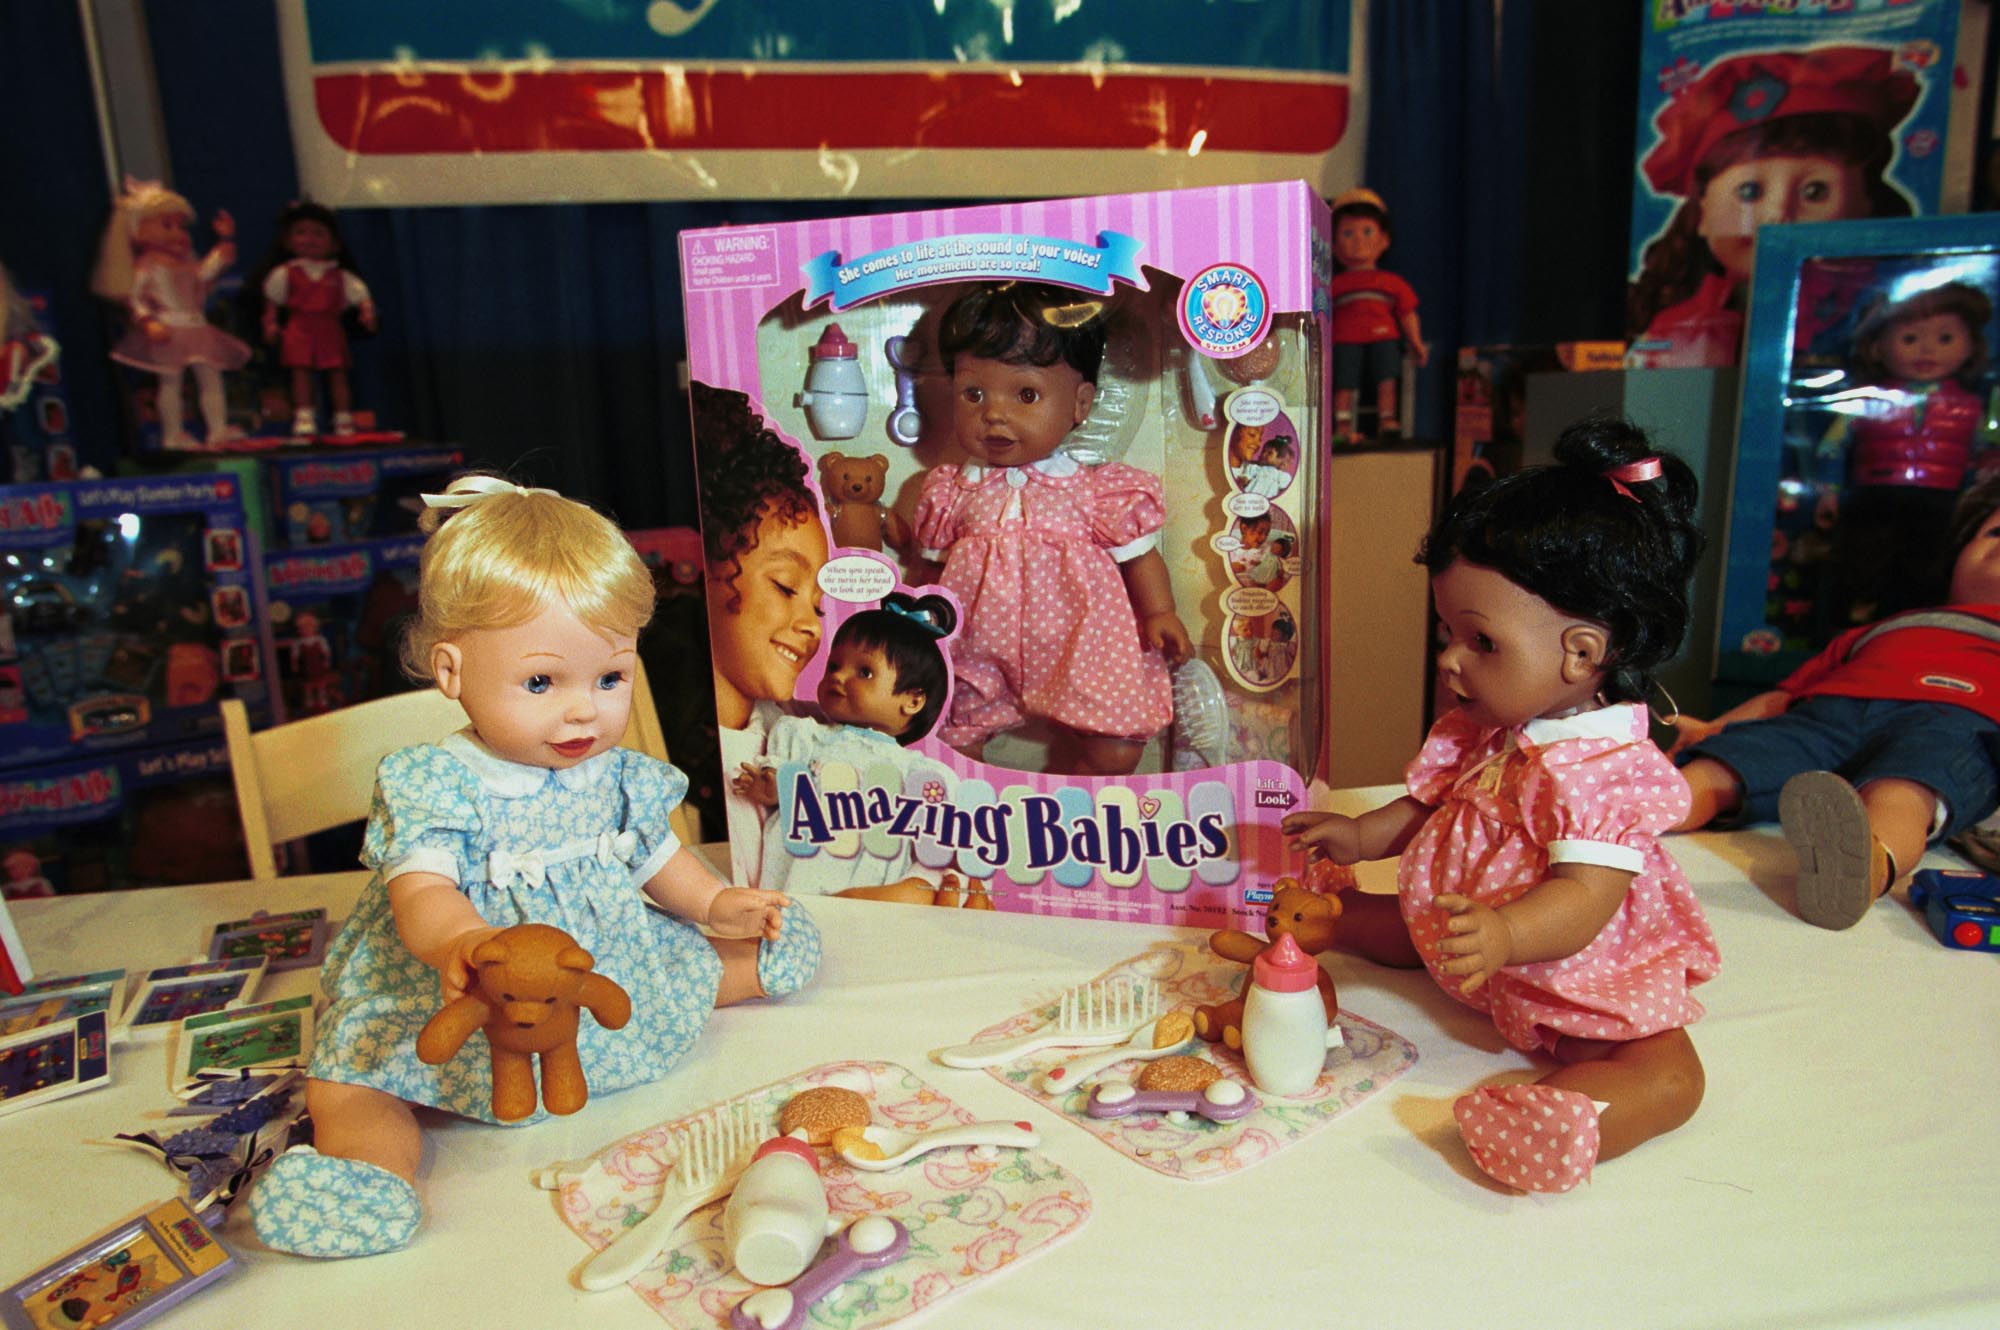 Playmates Amazing Babies, which respond to voice commands,  sit on display at PlayDate 2000, held in the Metropolitan Pavilion in New York City on October 17, 2000.  The event is held in order to spotlight the hottest toys and games for the holiday season.